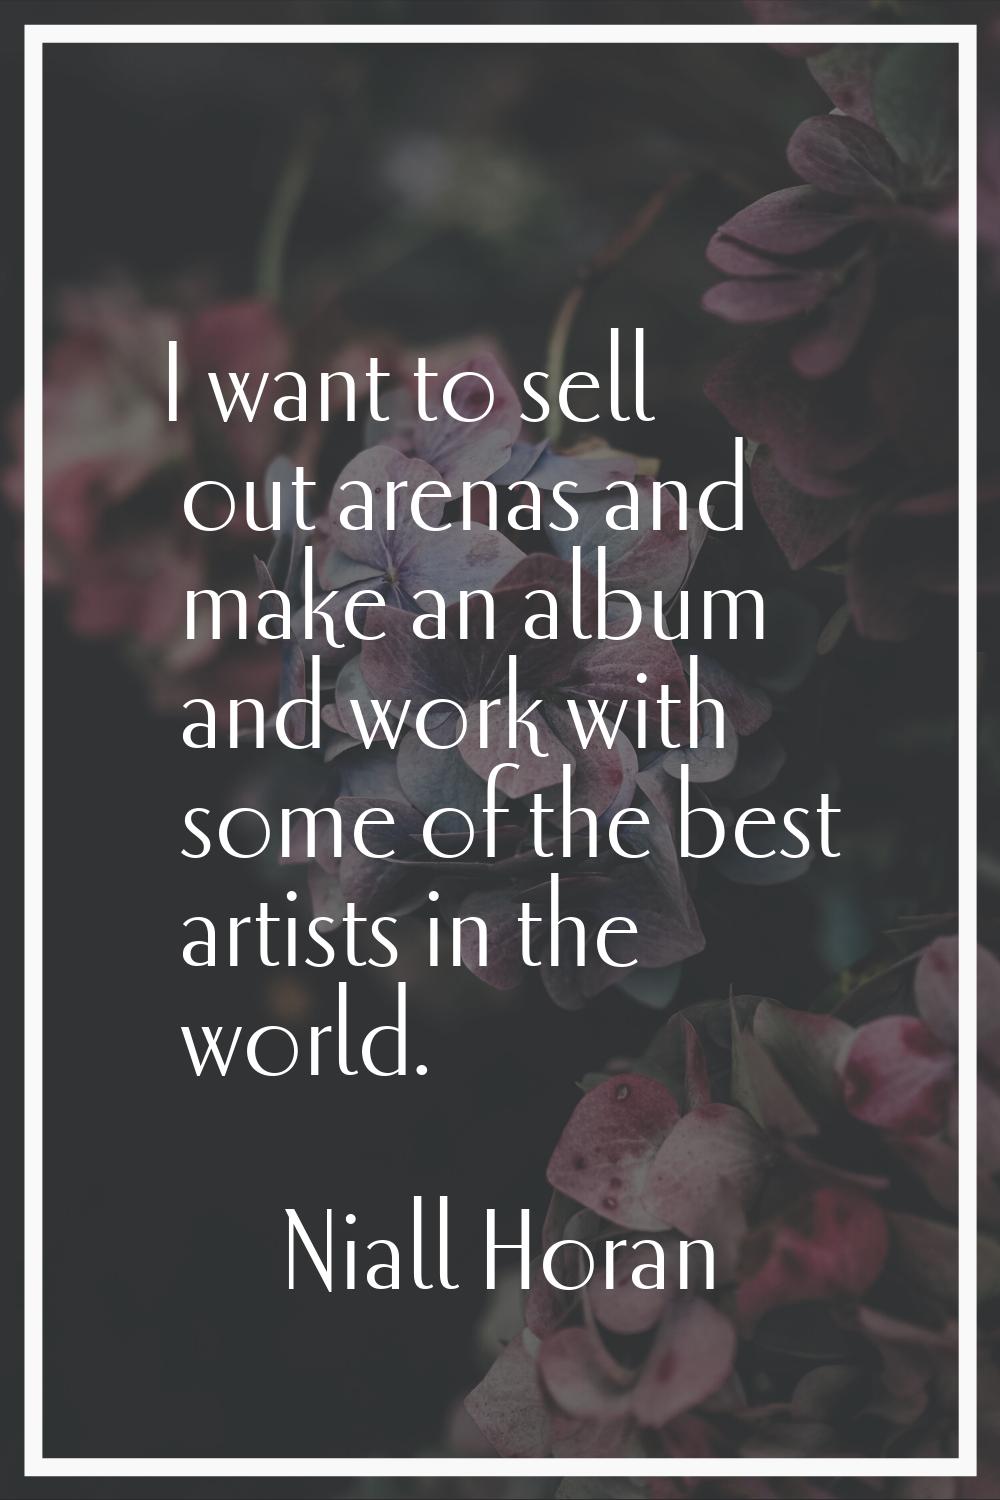 I want to sell out arenas and make an album and work with some of the best artists in the world.